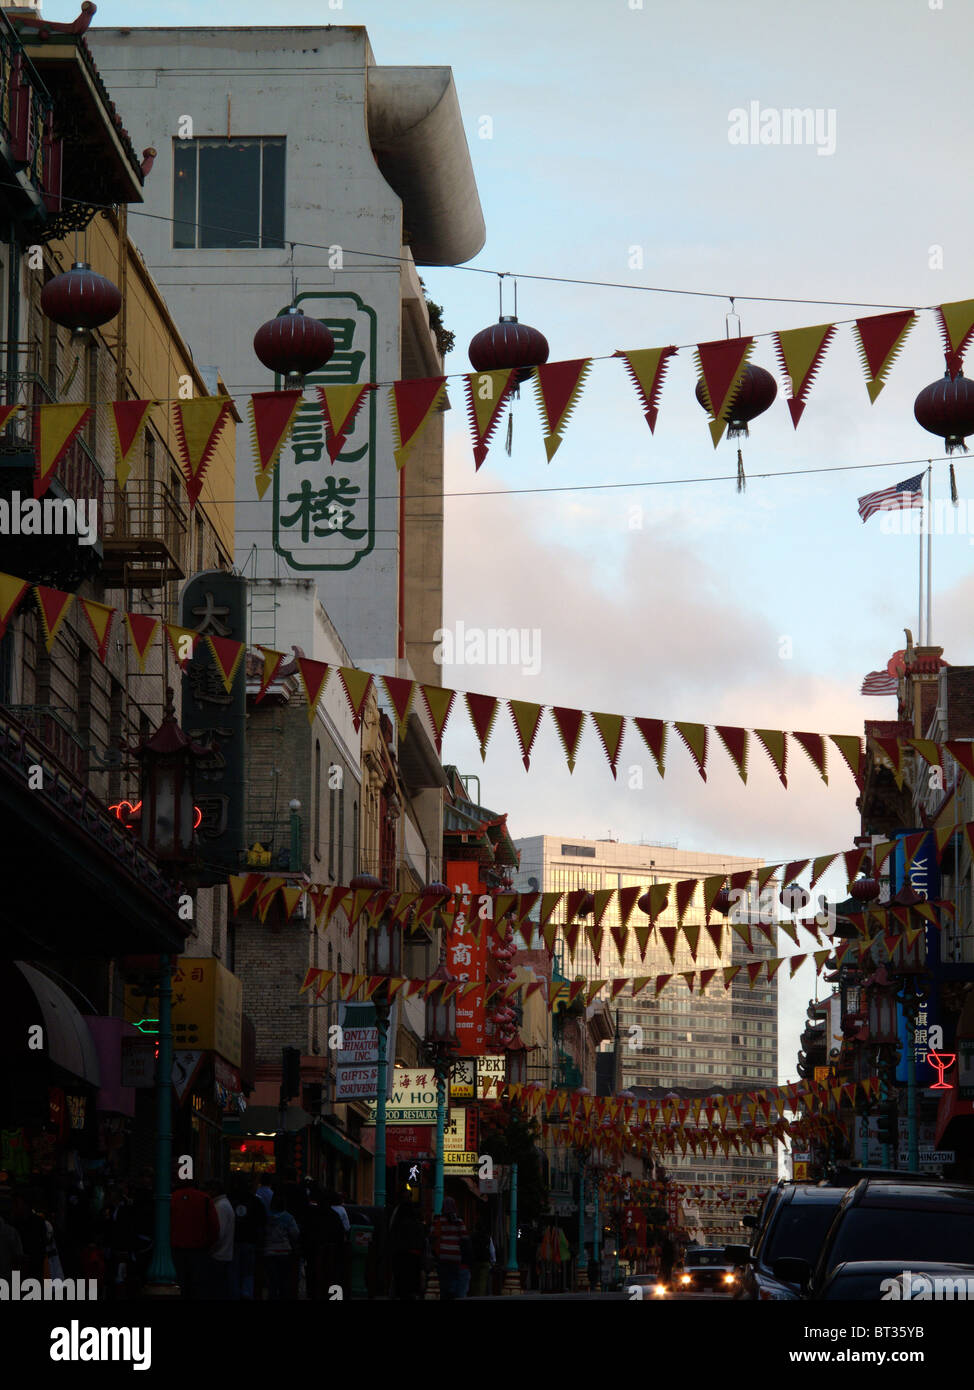 Chinatown in San Francisco in California, United States Stock Photo